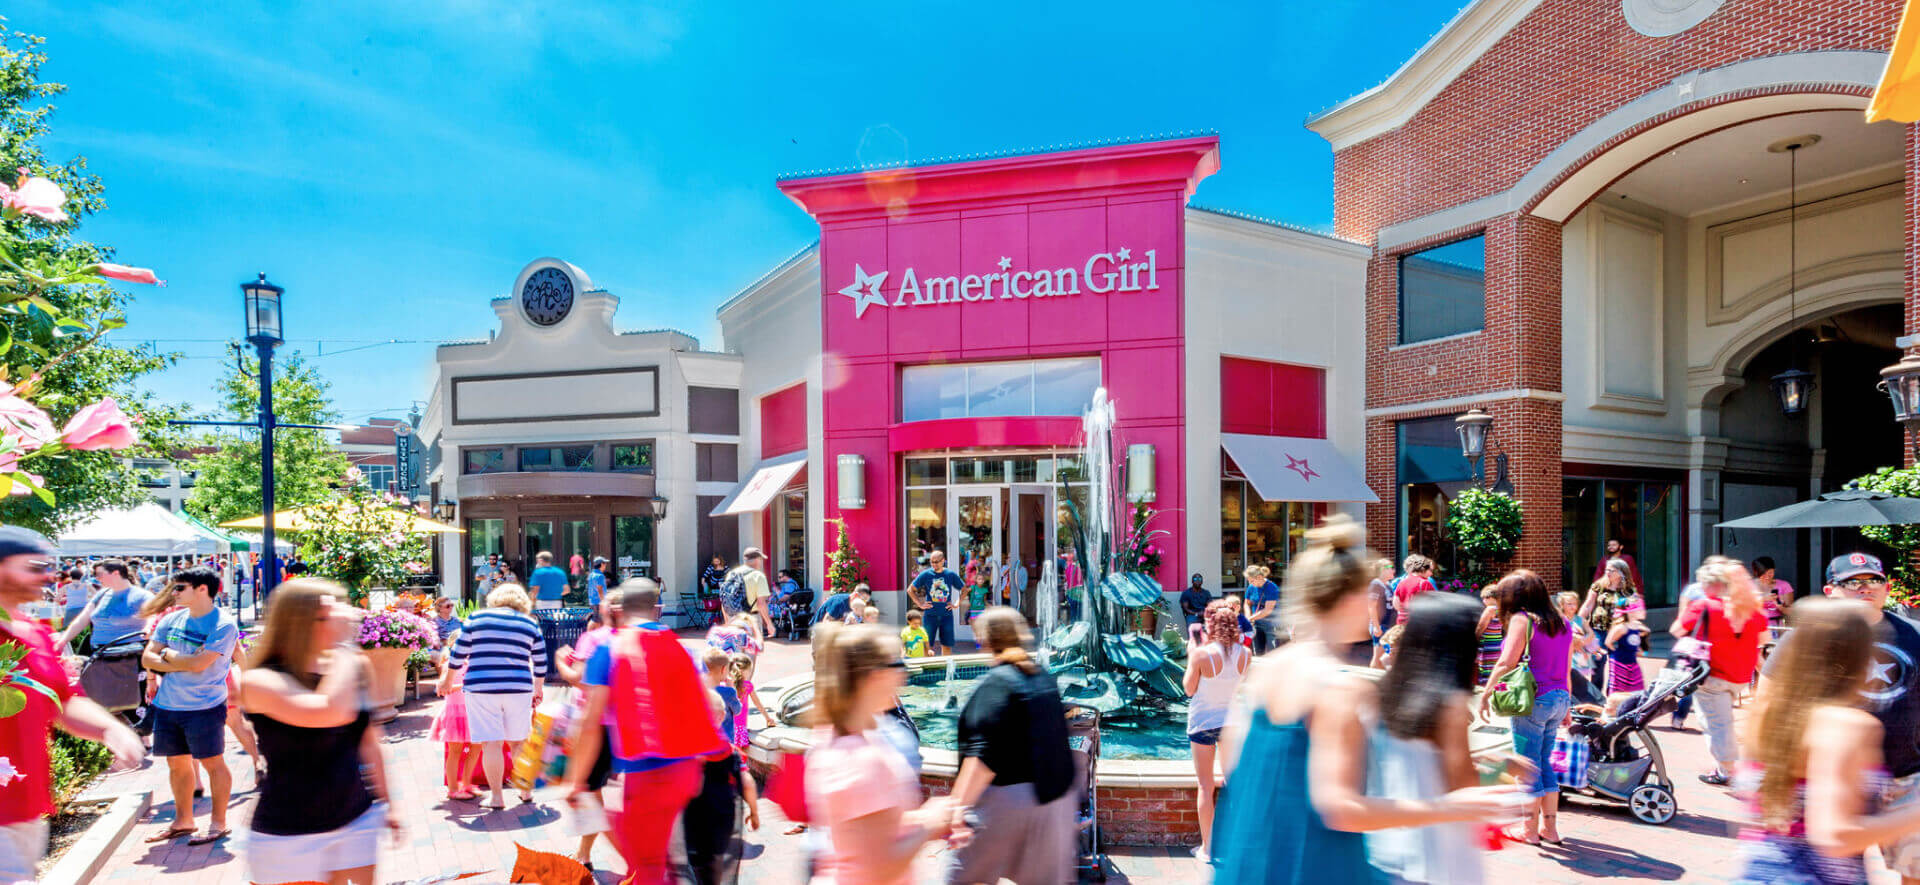 People walking in front of American Girl's pink storefront